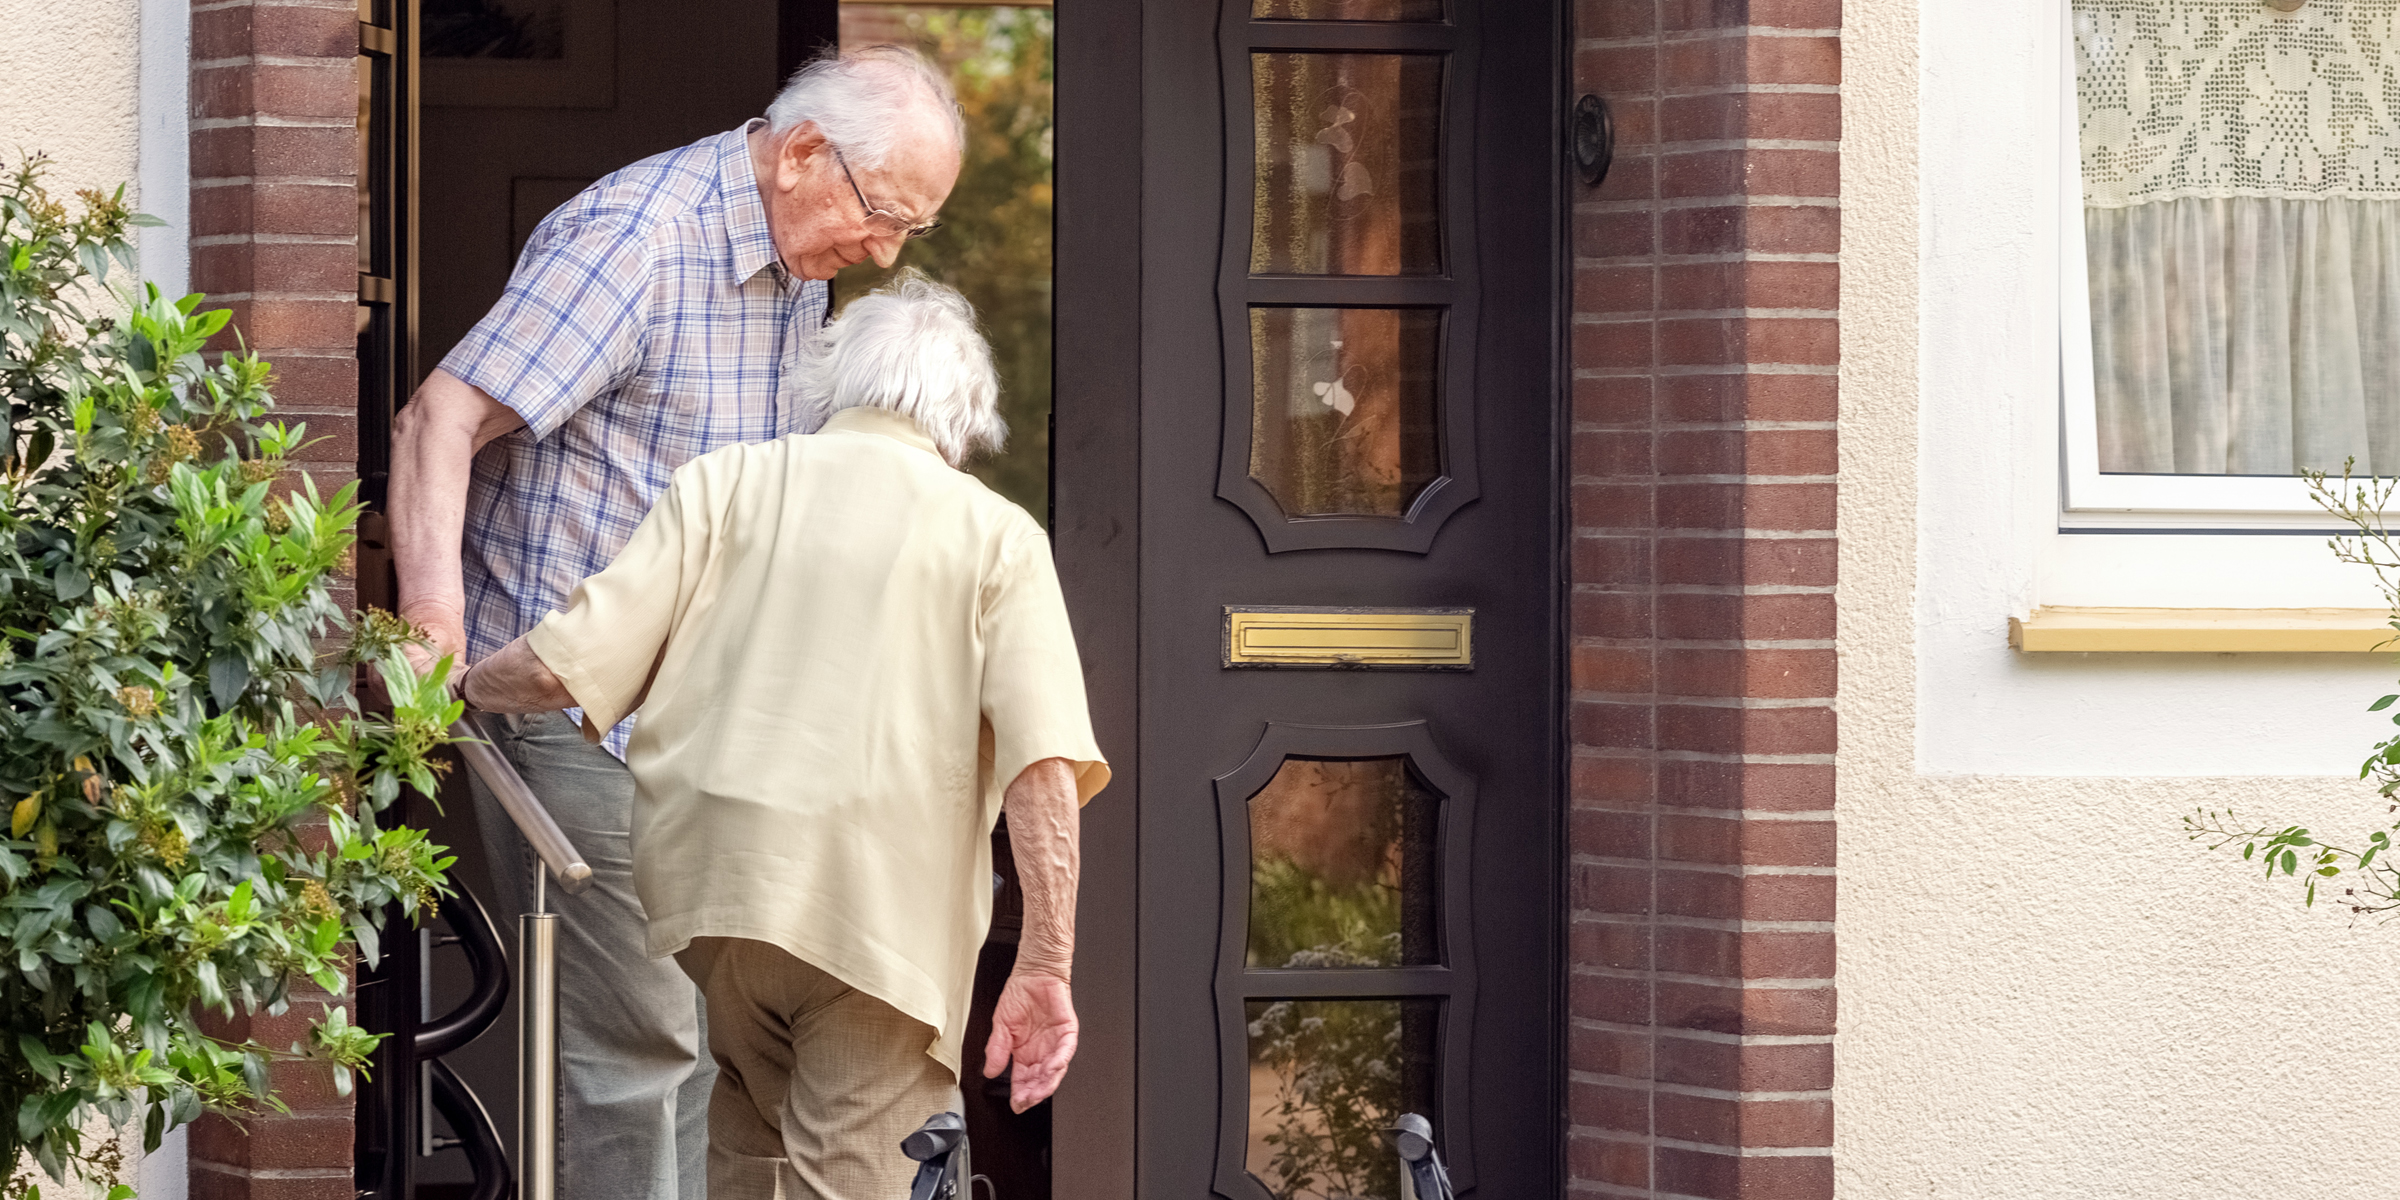 An elderly couple walking up the stairs | Source: Shutterstock